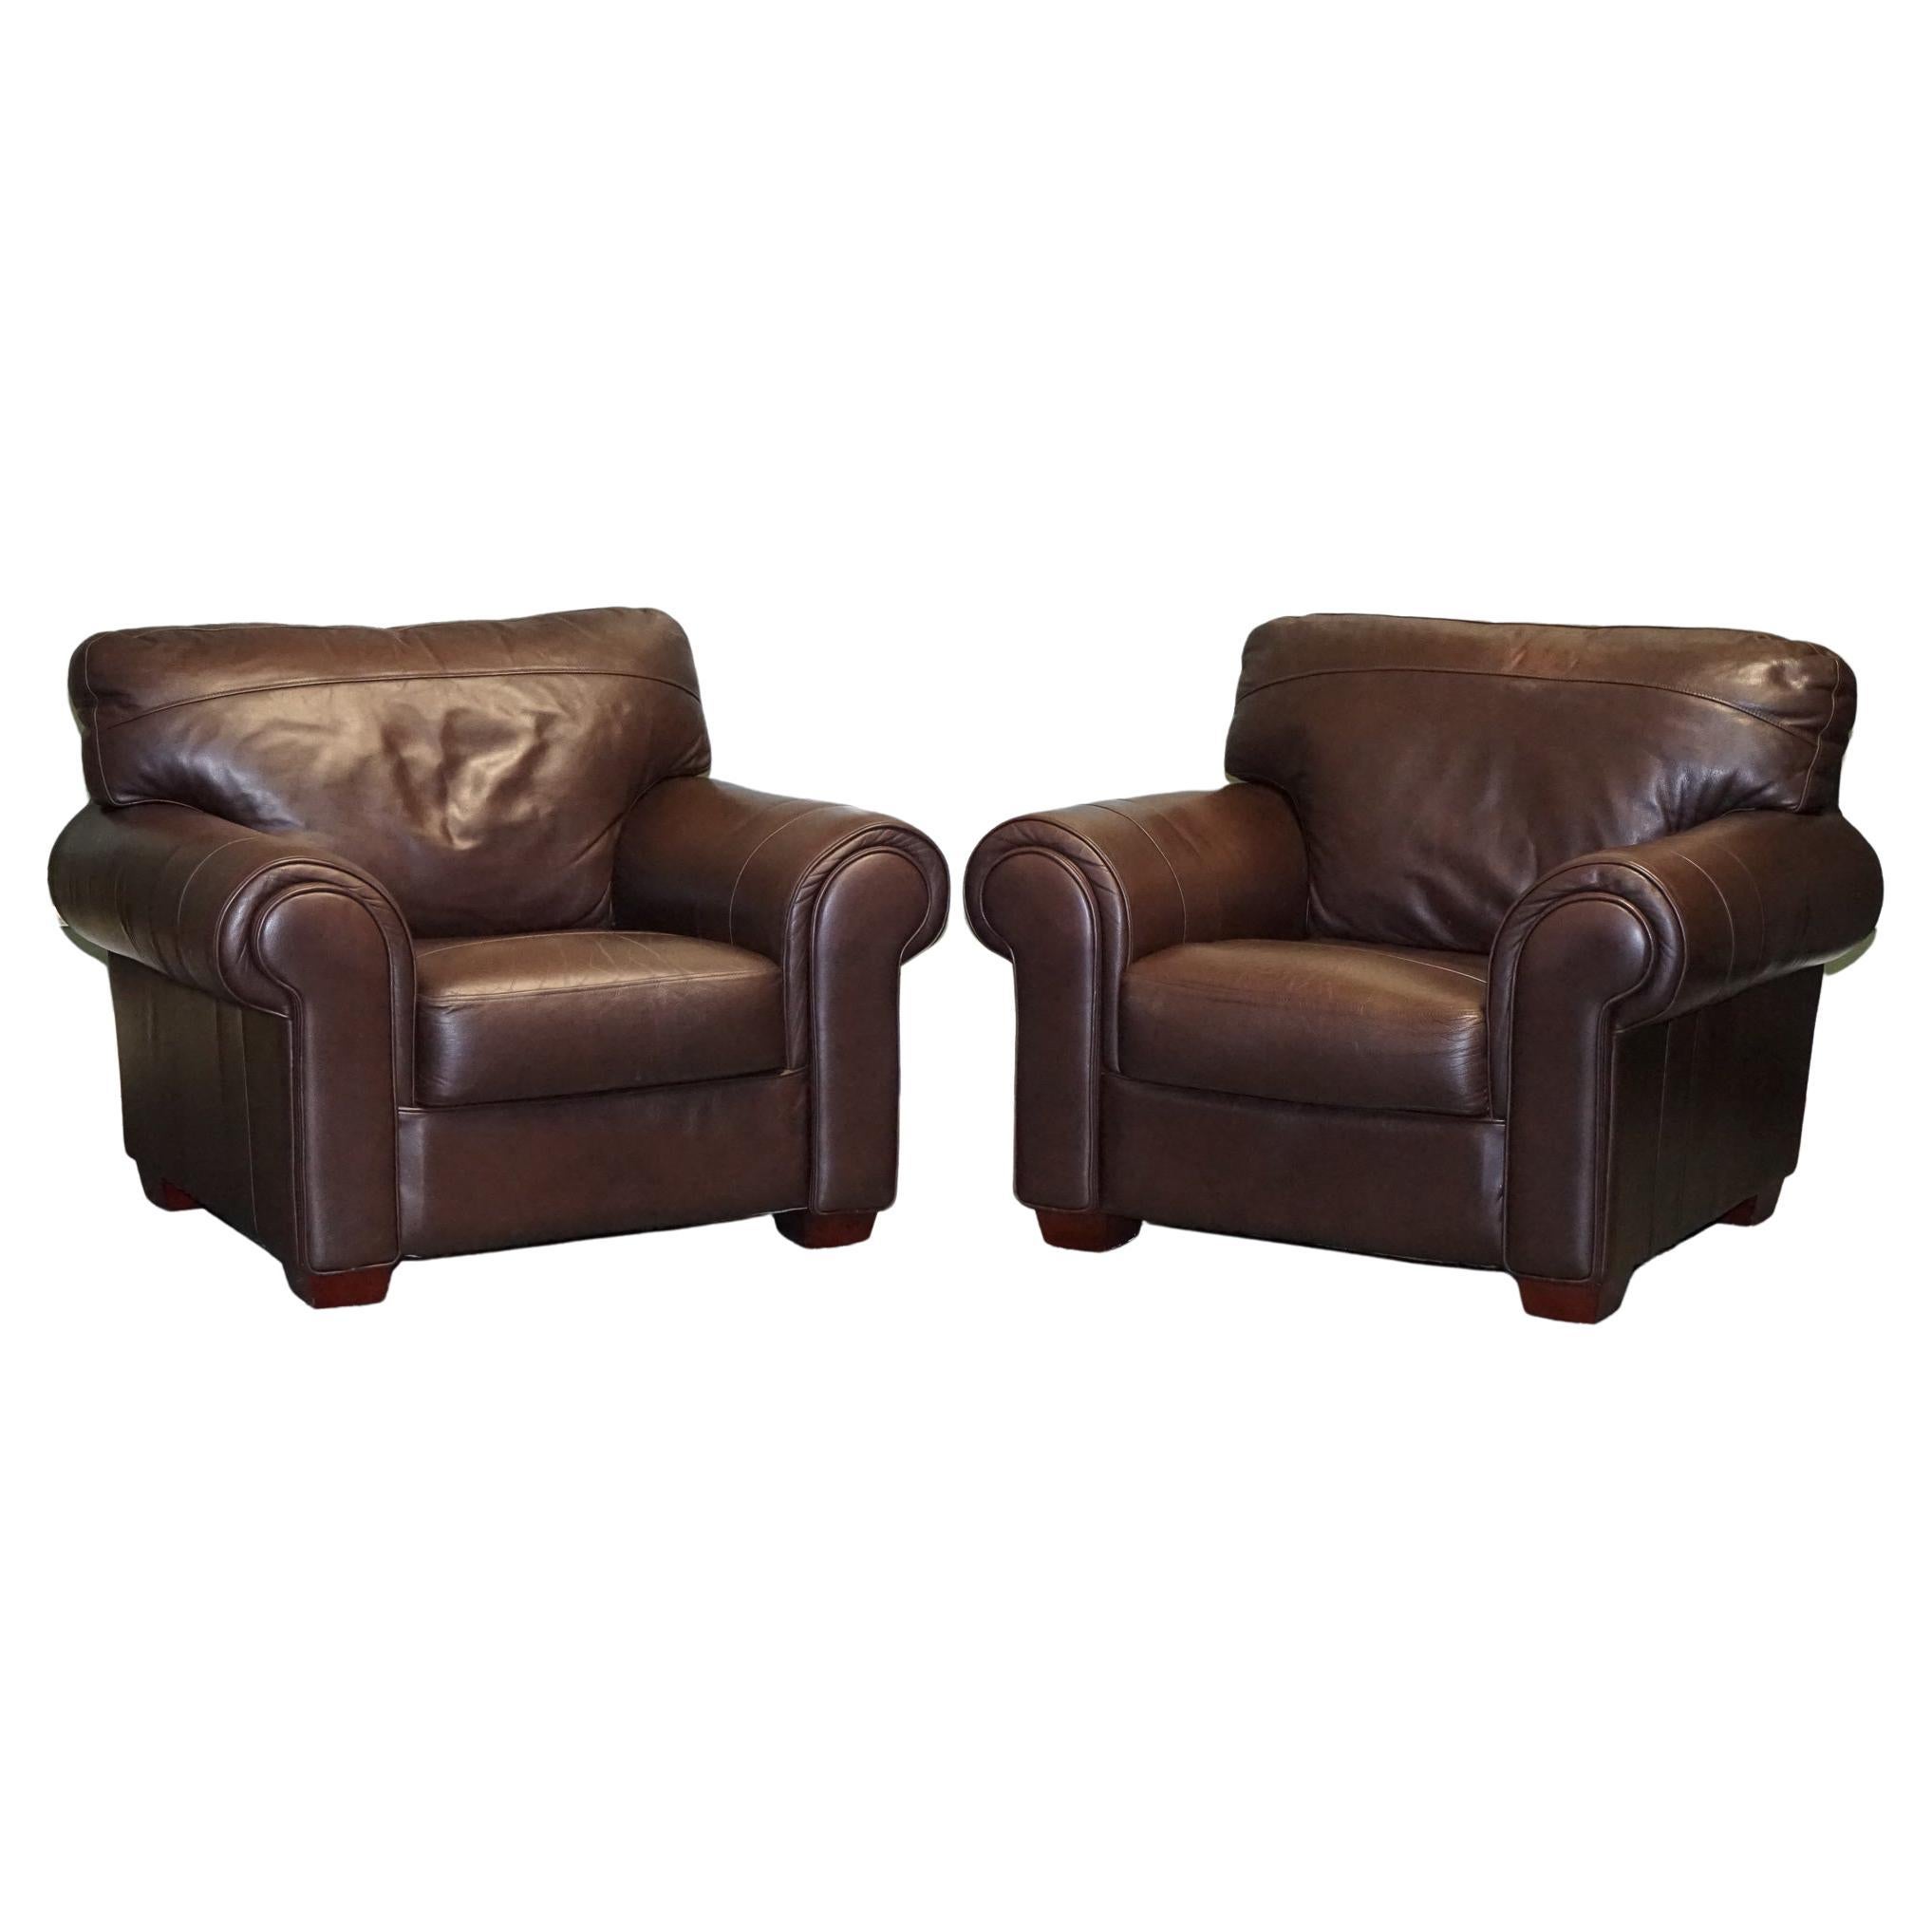 PAIR OF LARGE COMFORTABLE BROWN LEATHER ARMCHAIRS, MATCHiNG SOFA AVAILABLE For Sale